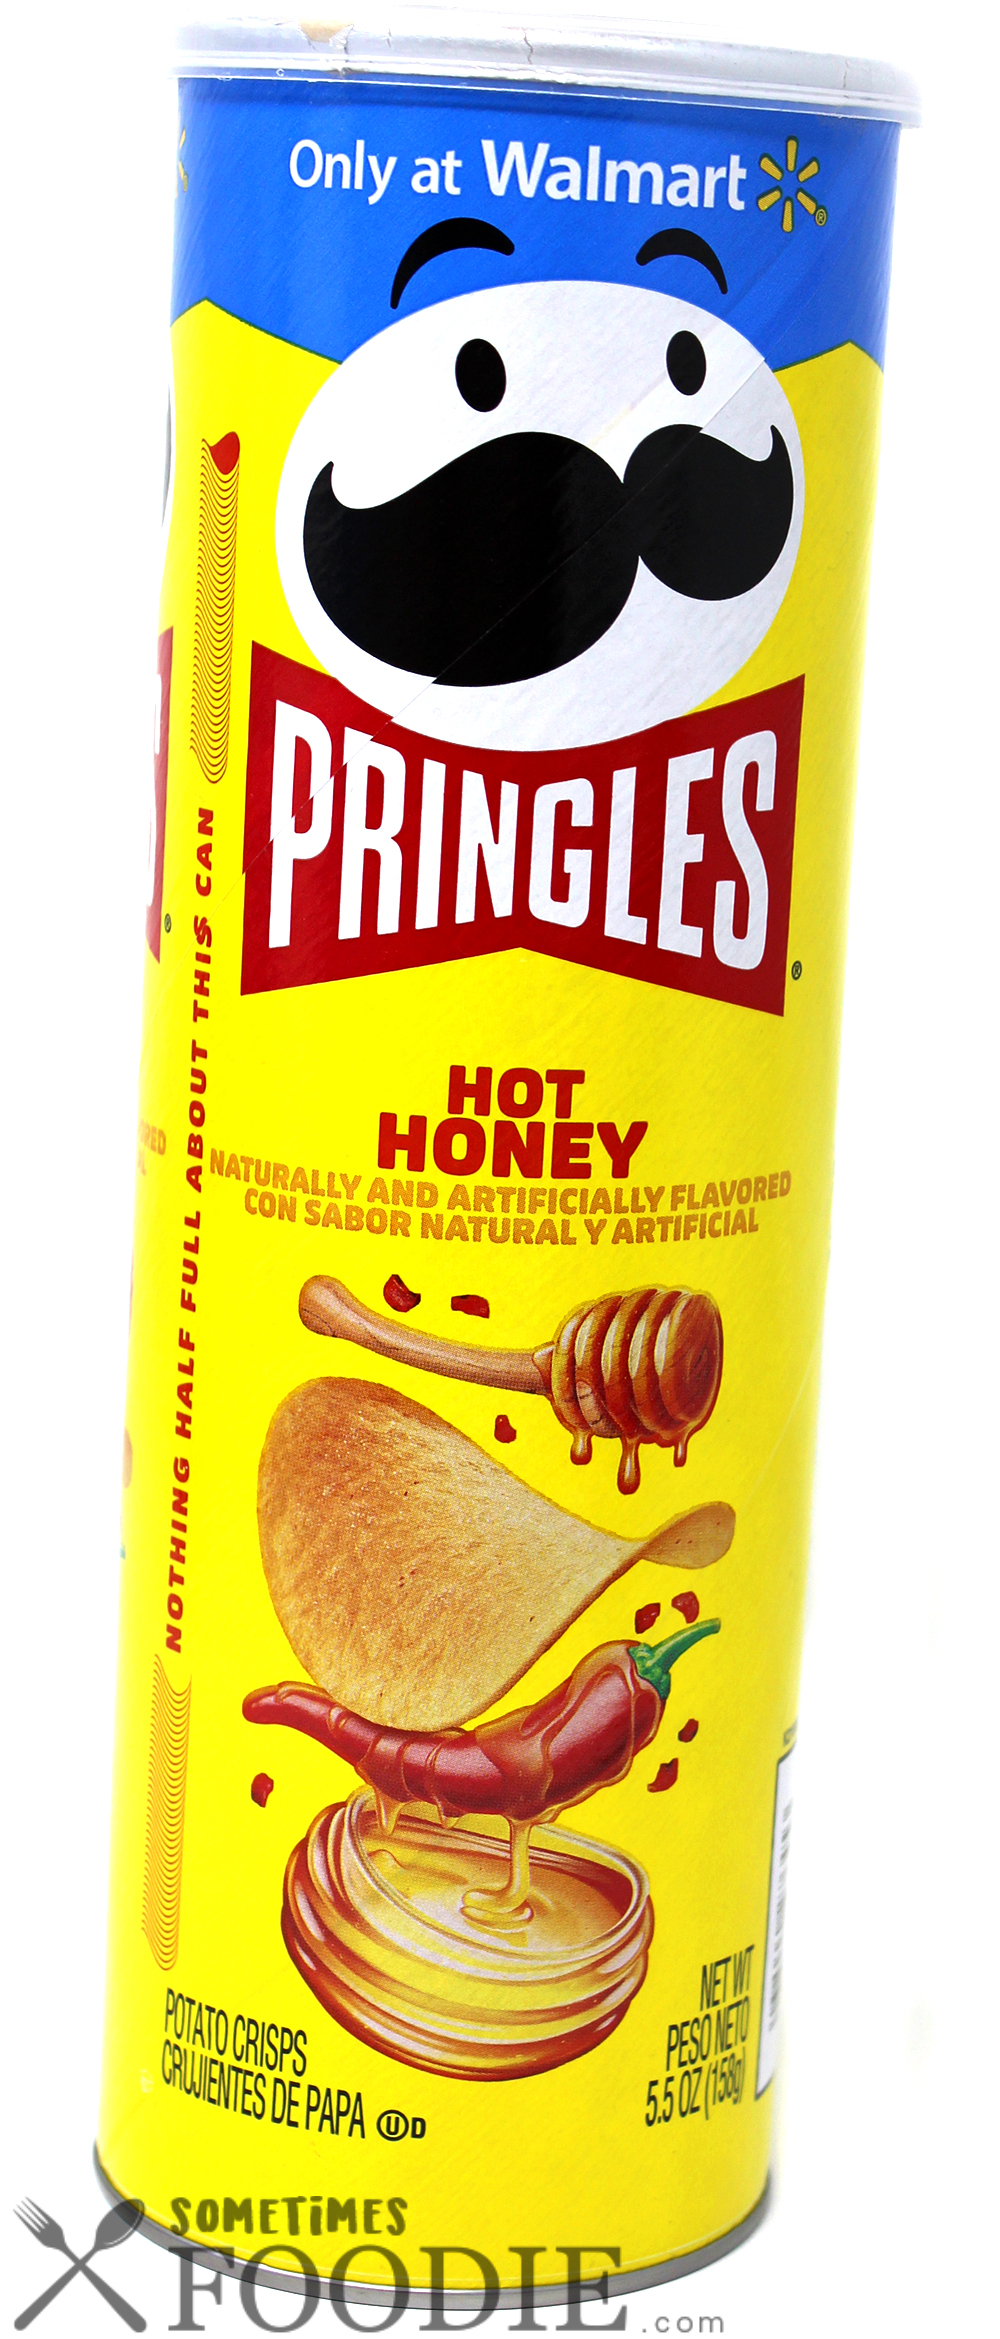 Sometimes Foodie: I DESTROYED These - Hot Honey Pringles